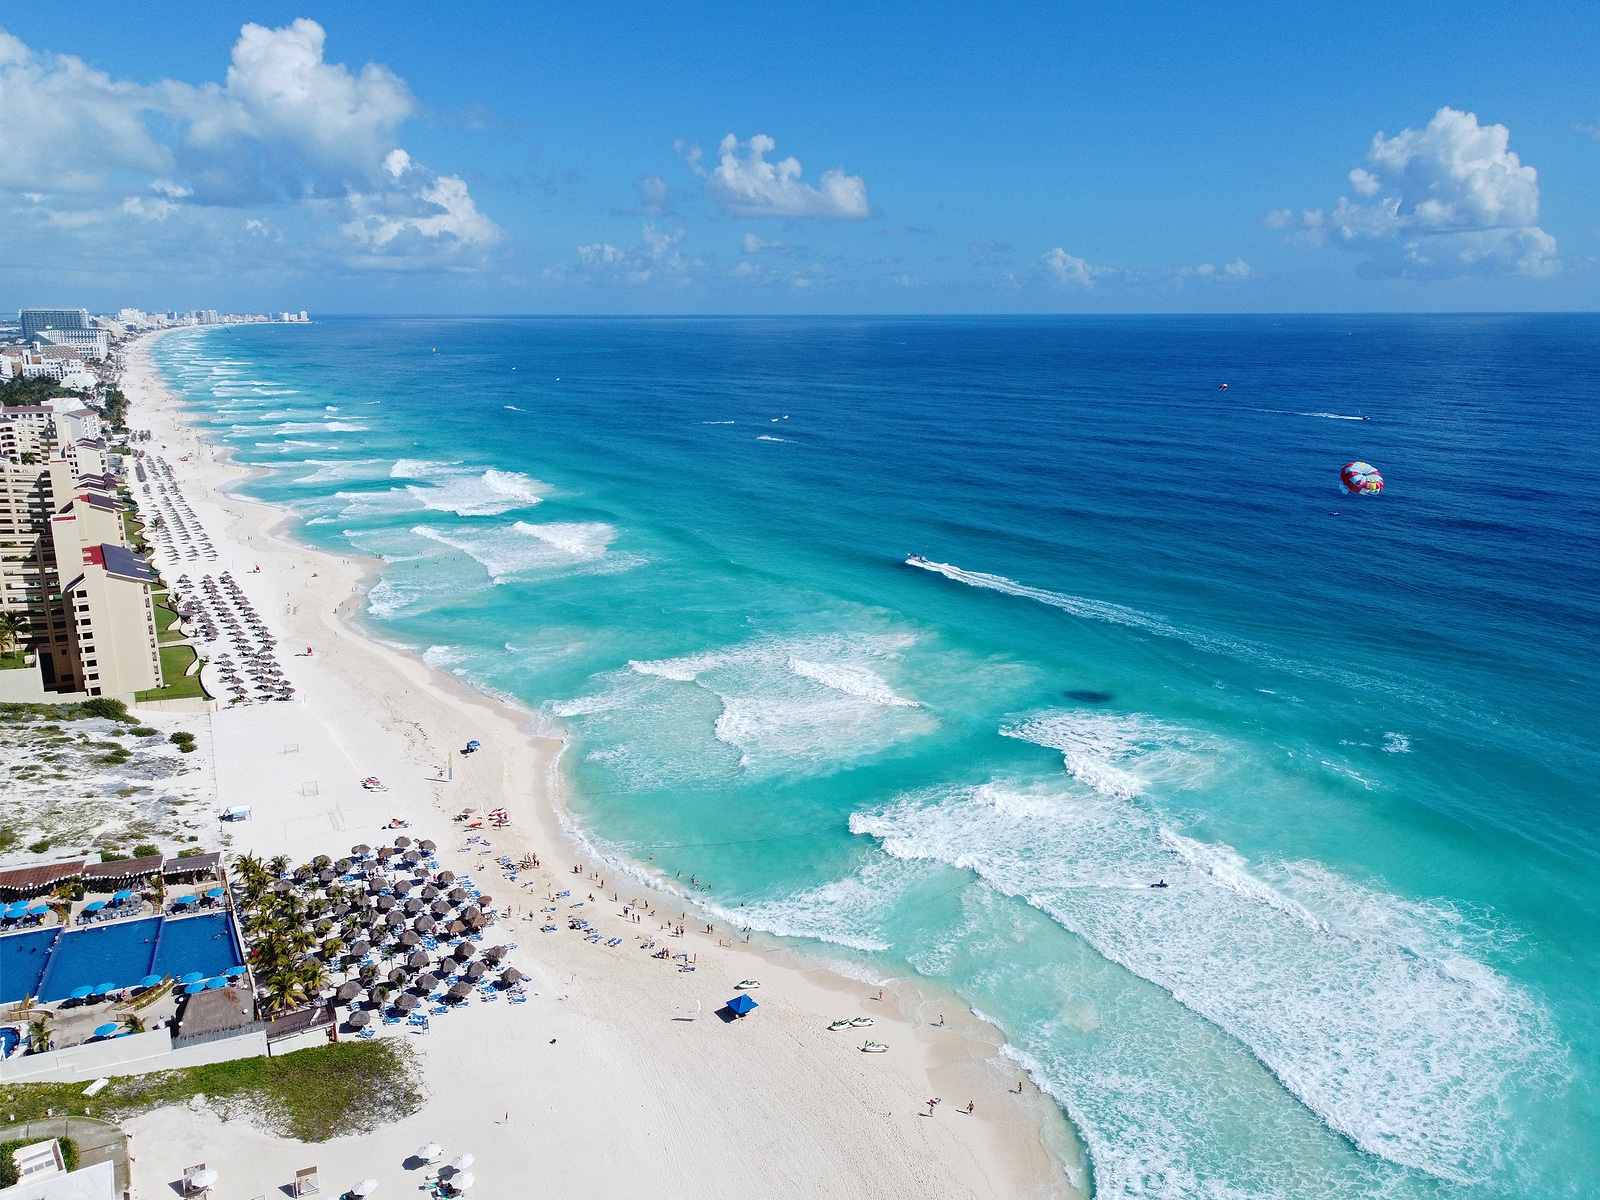 Cancun beach and hotel zone aerial view by Krystal International Vacation Club